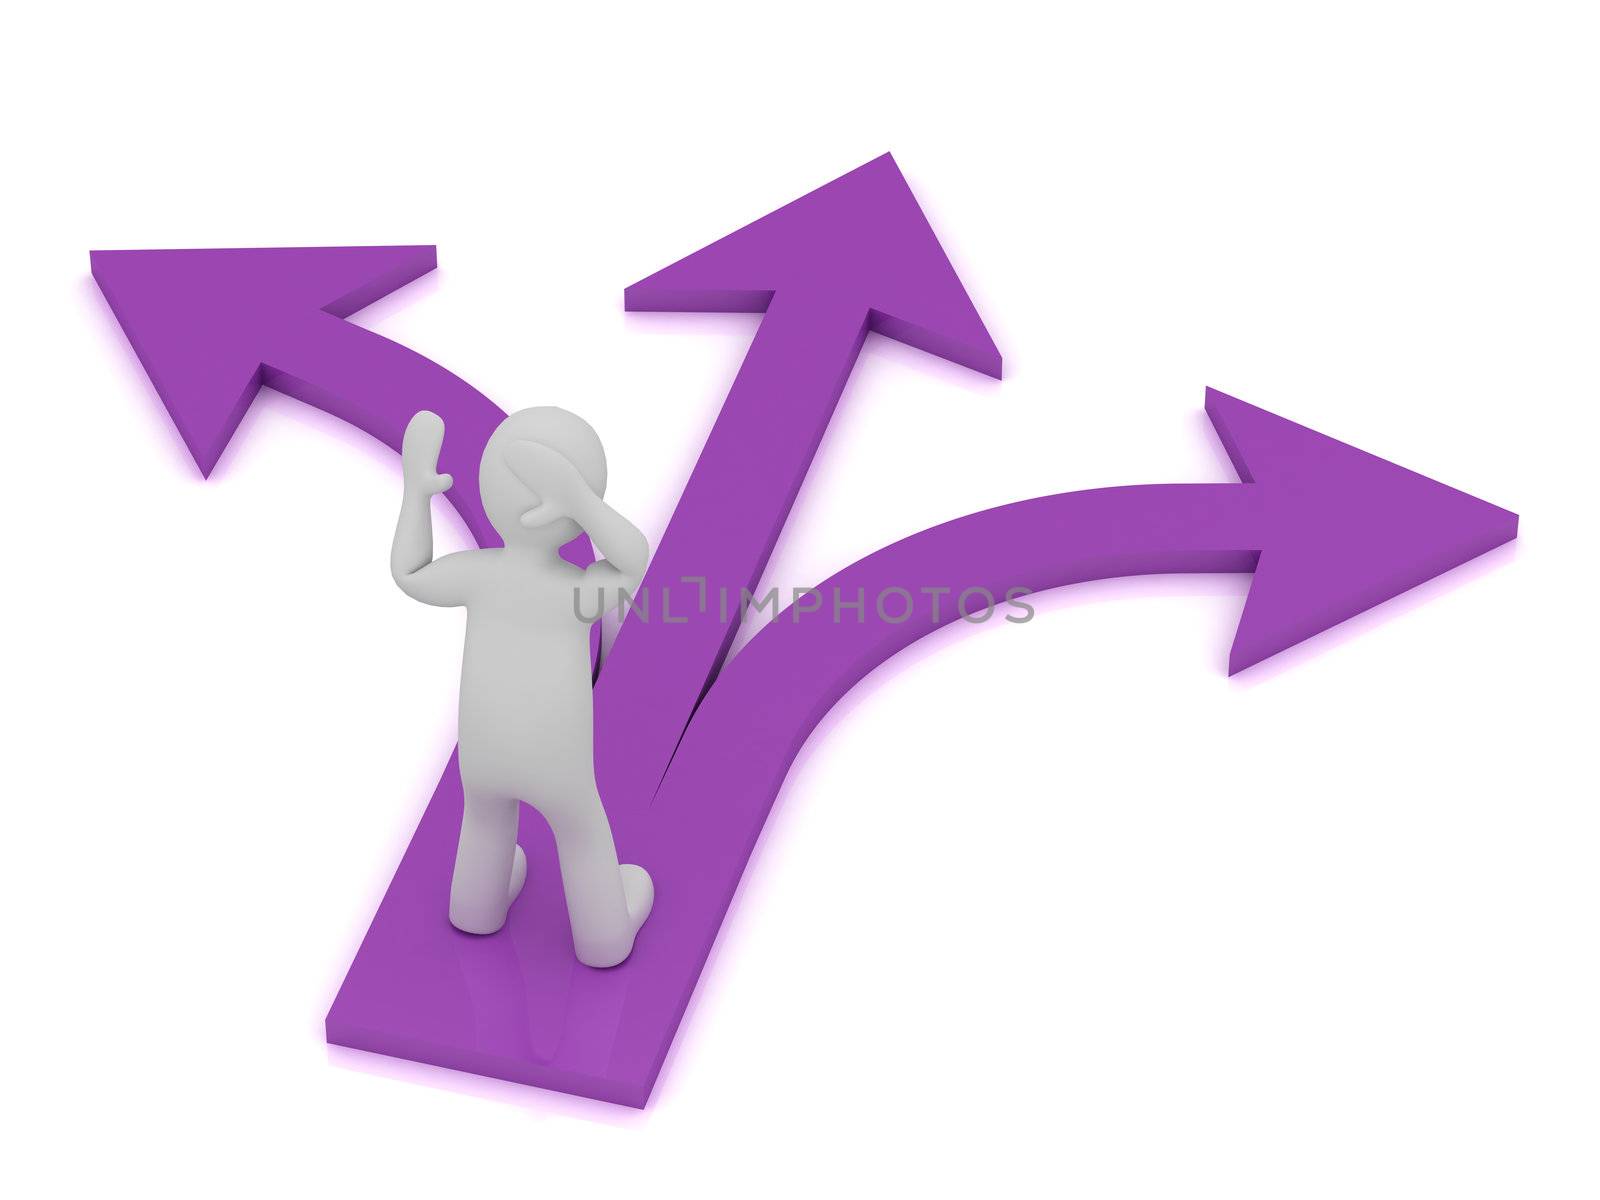 3D small Human Character at the intersection of three purple arrows on white background